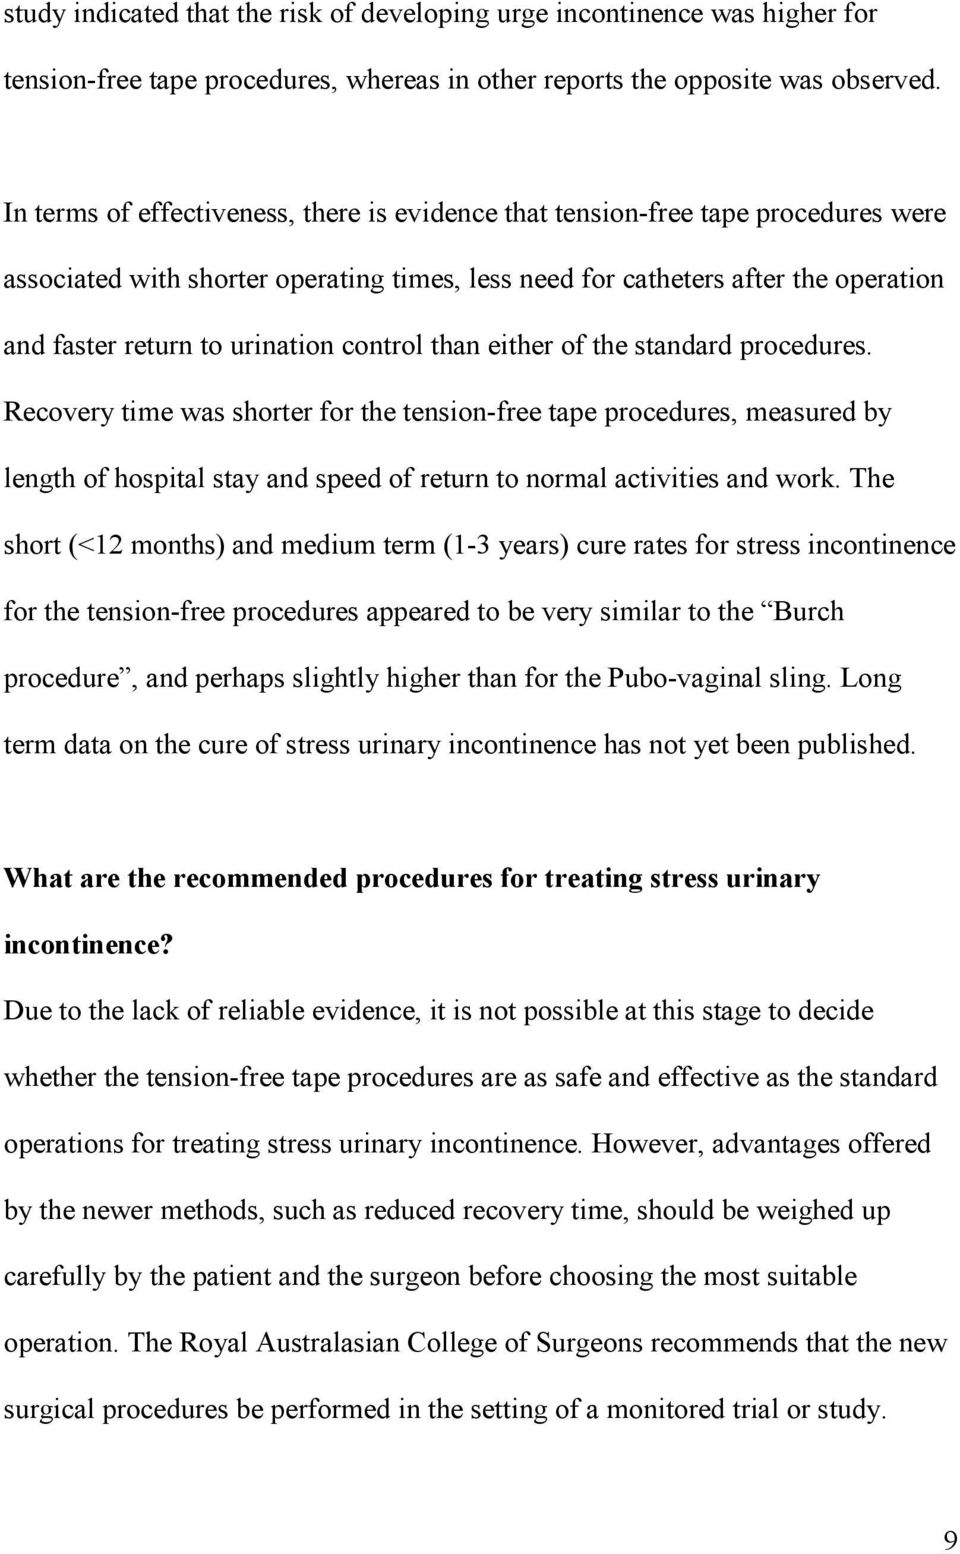 control than either of the standard procedures. Recovery time was shorter for the tension-free tape procedures, measured by length of hospital stay and speed of return to normal activities and work.